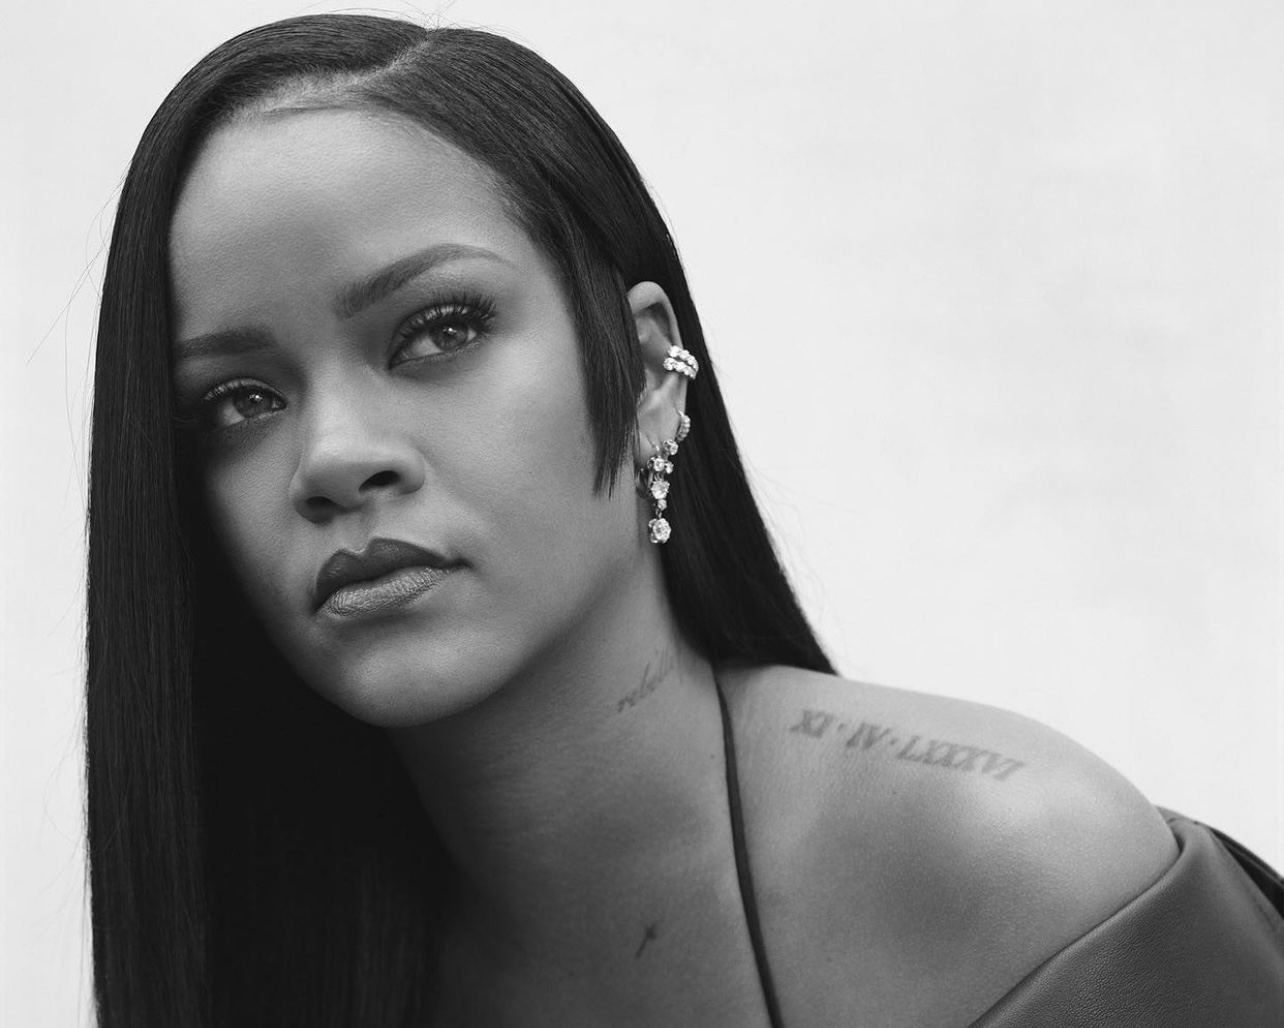 Rihanna Is Now the World's Richest Female Musician, Thanks to Fenty